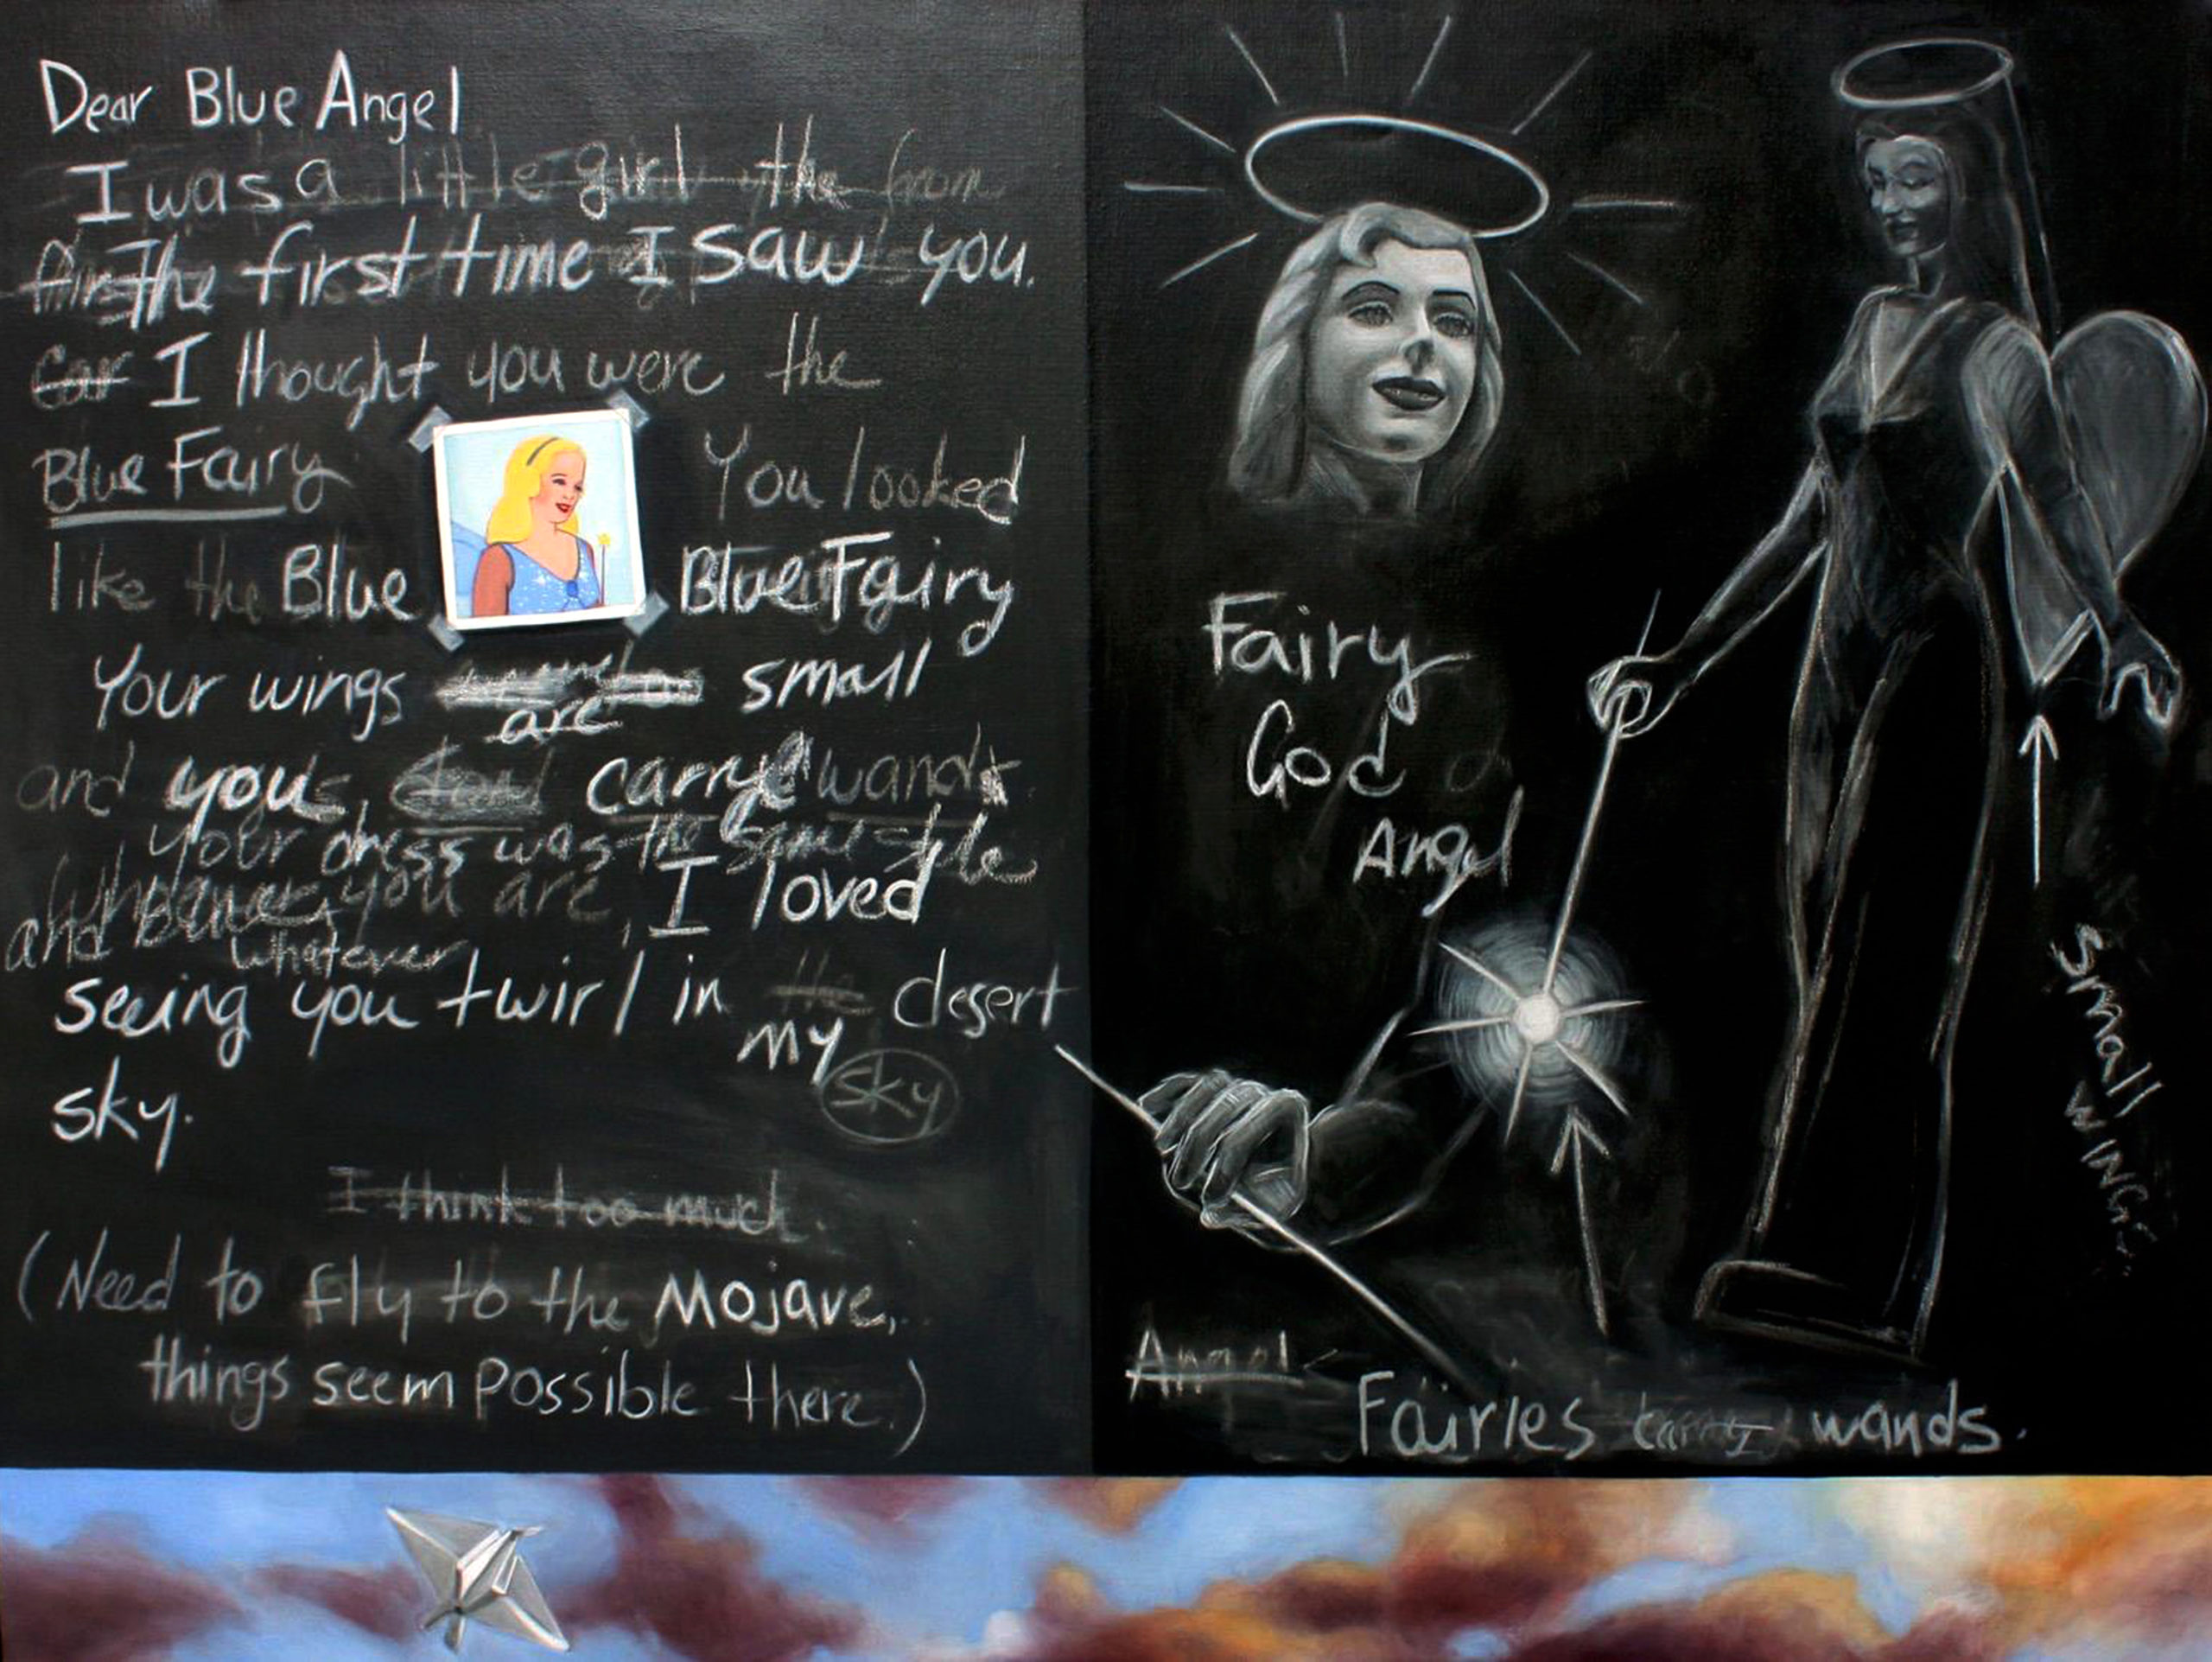 Painting created to look like a chalkboard with writing on it and drawings of the Blue Angel Motel statue.